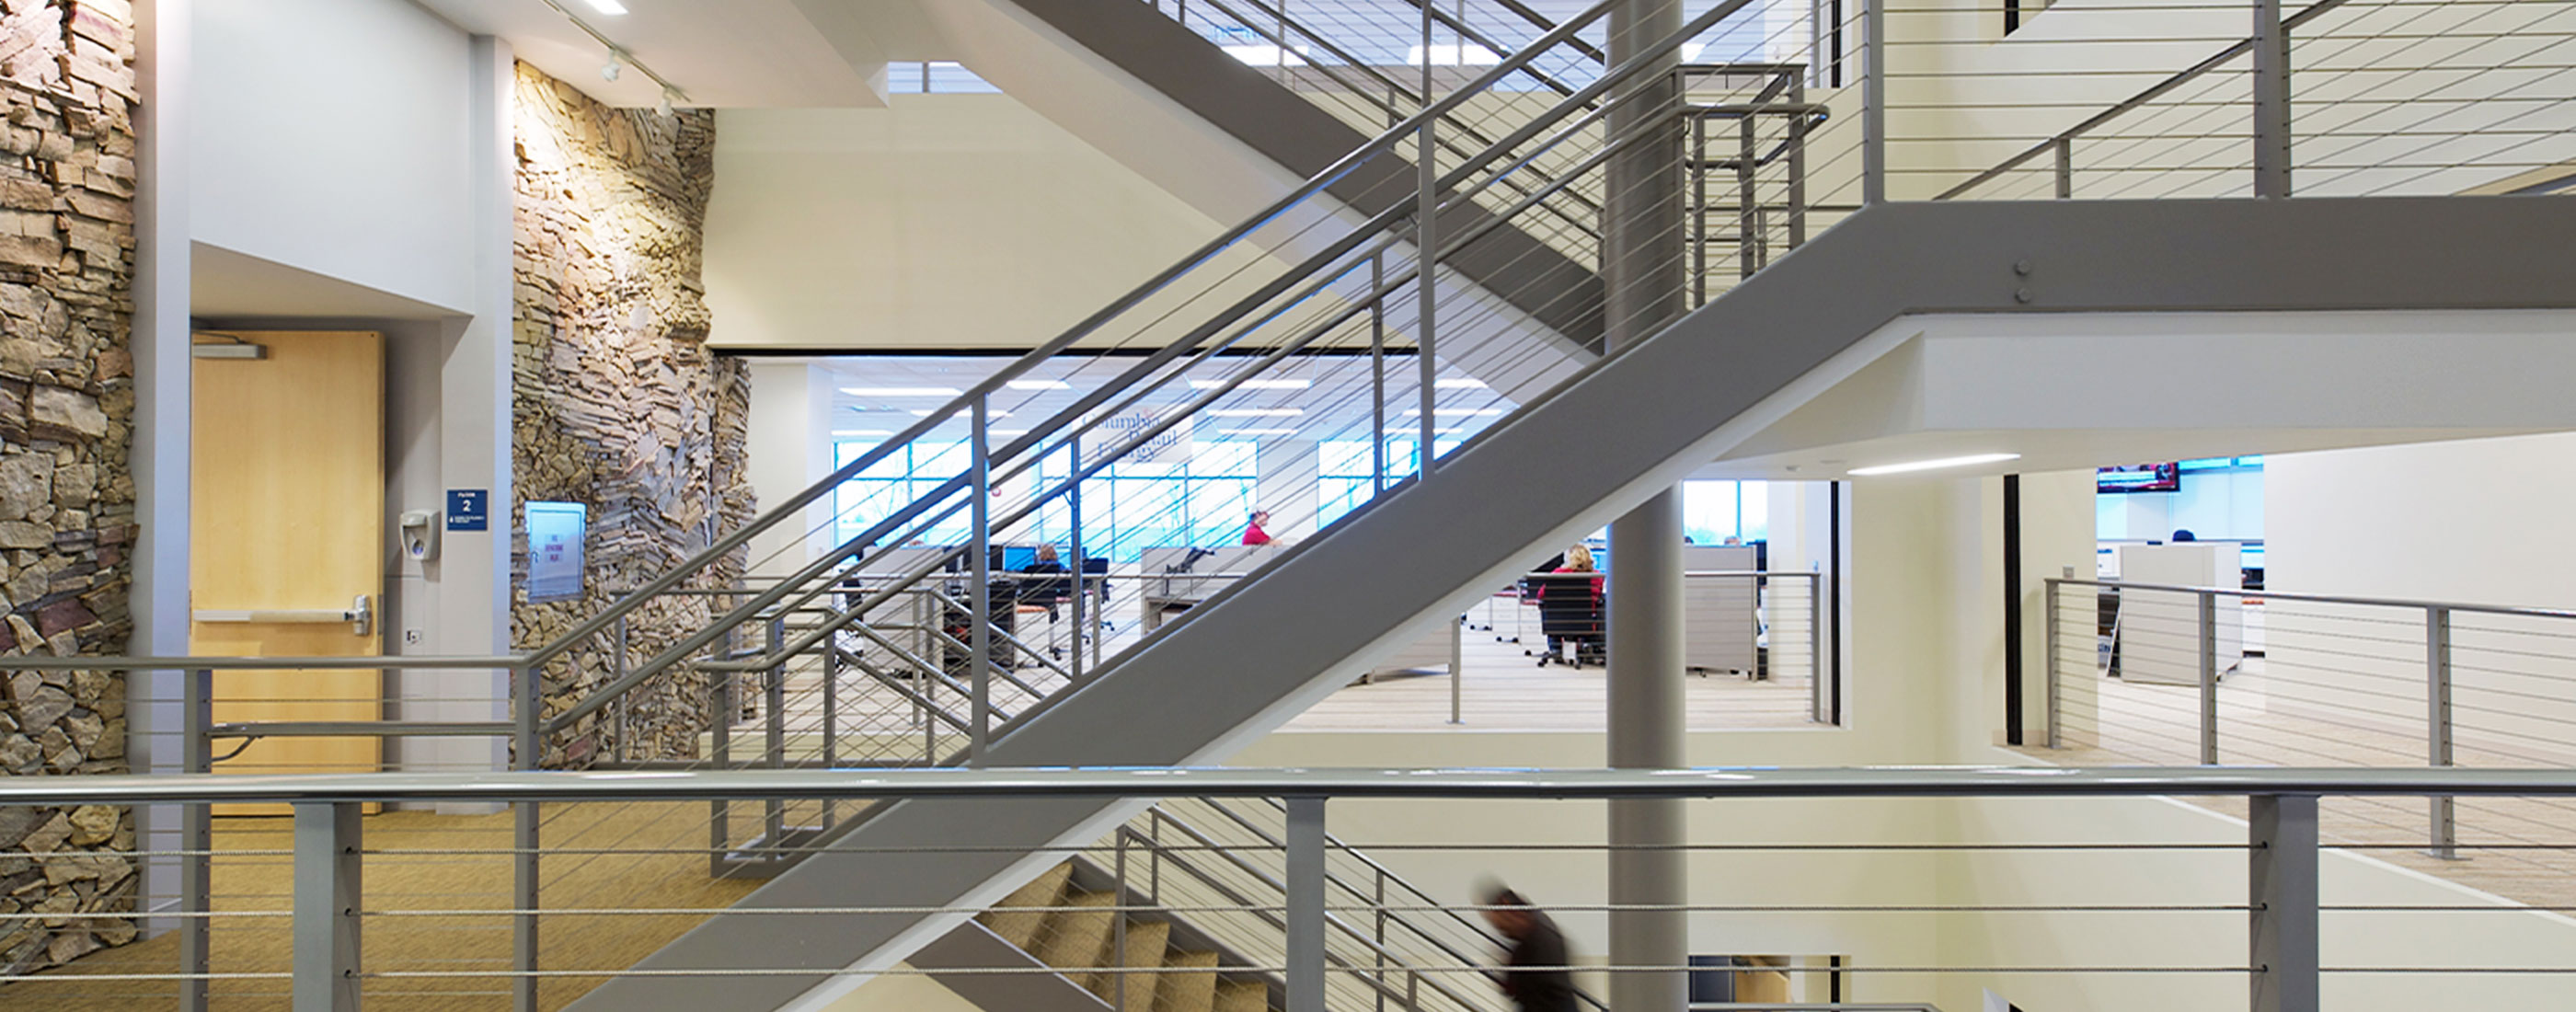 Staircases inside IGS Energy's LEED-NC corporate headquarters building.